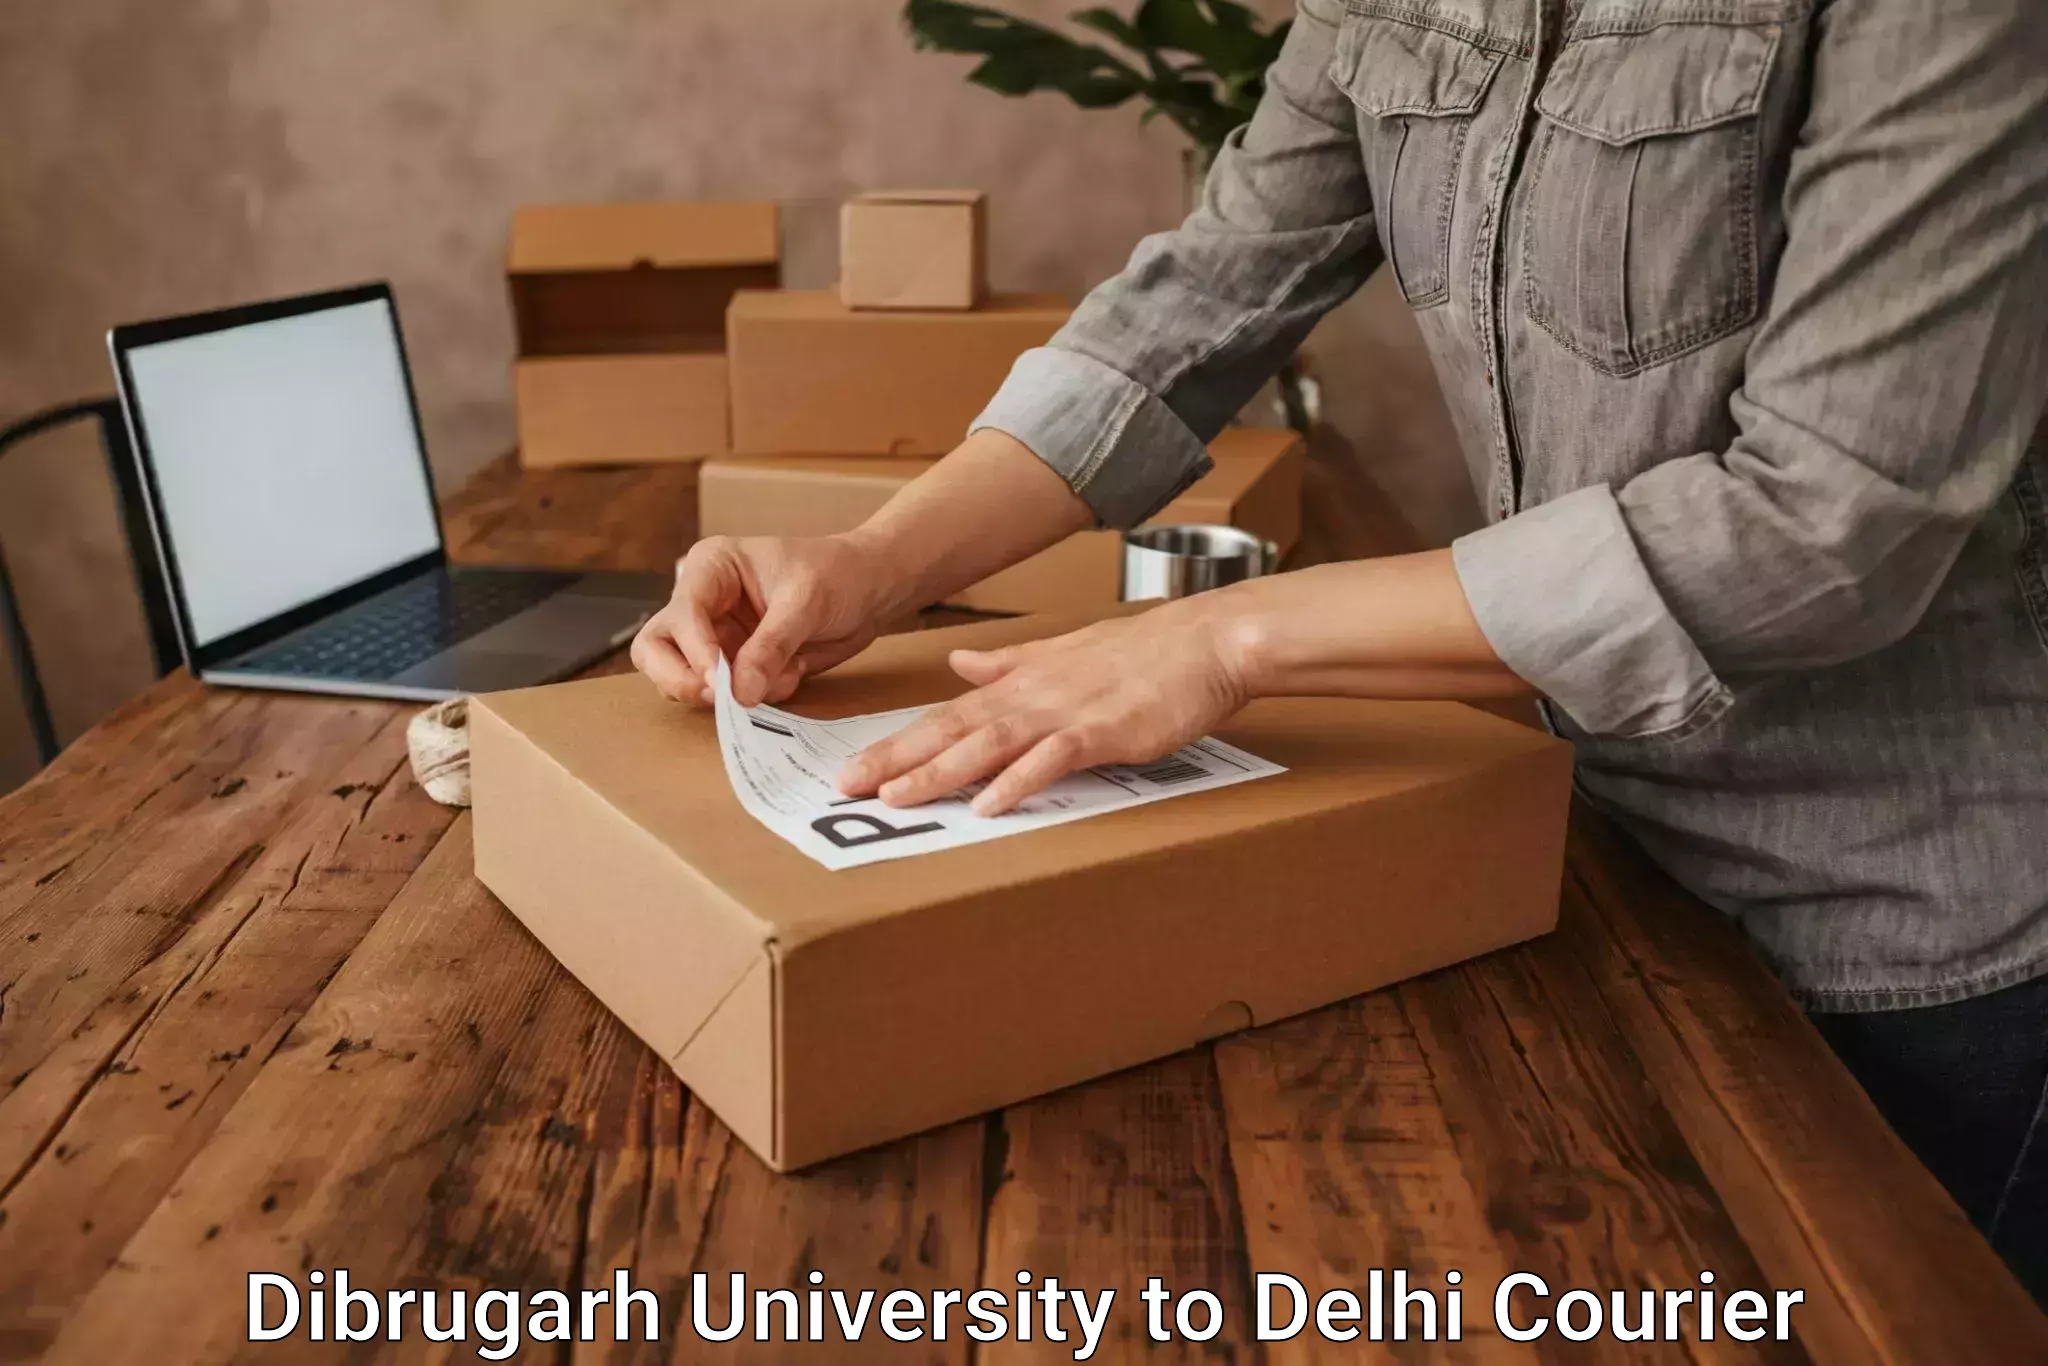 Tailored shipping plans Dibrugarh University to East Delhi